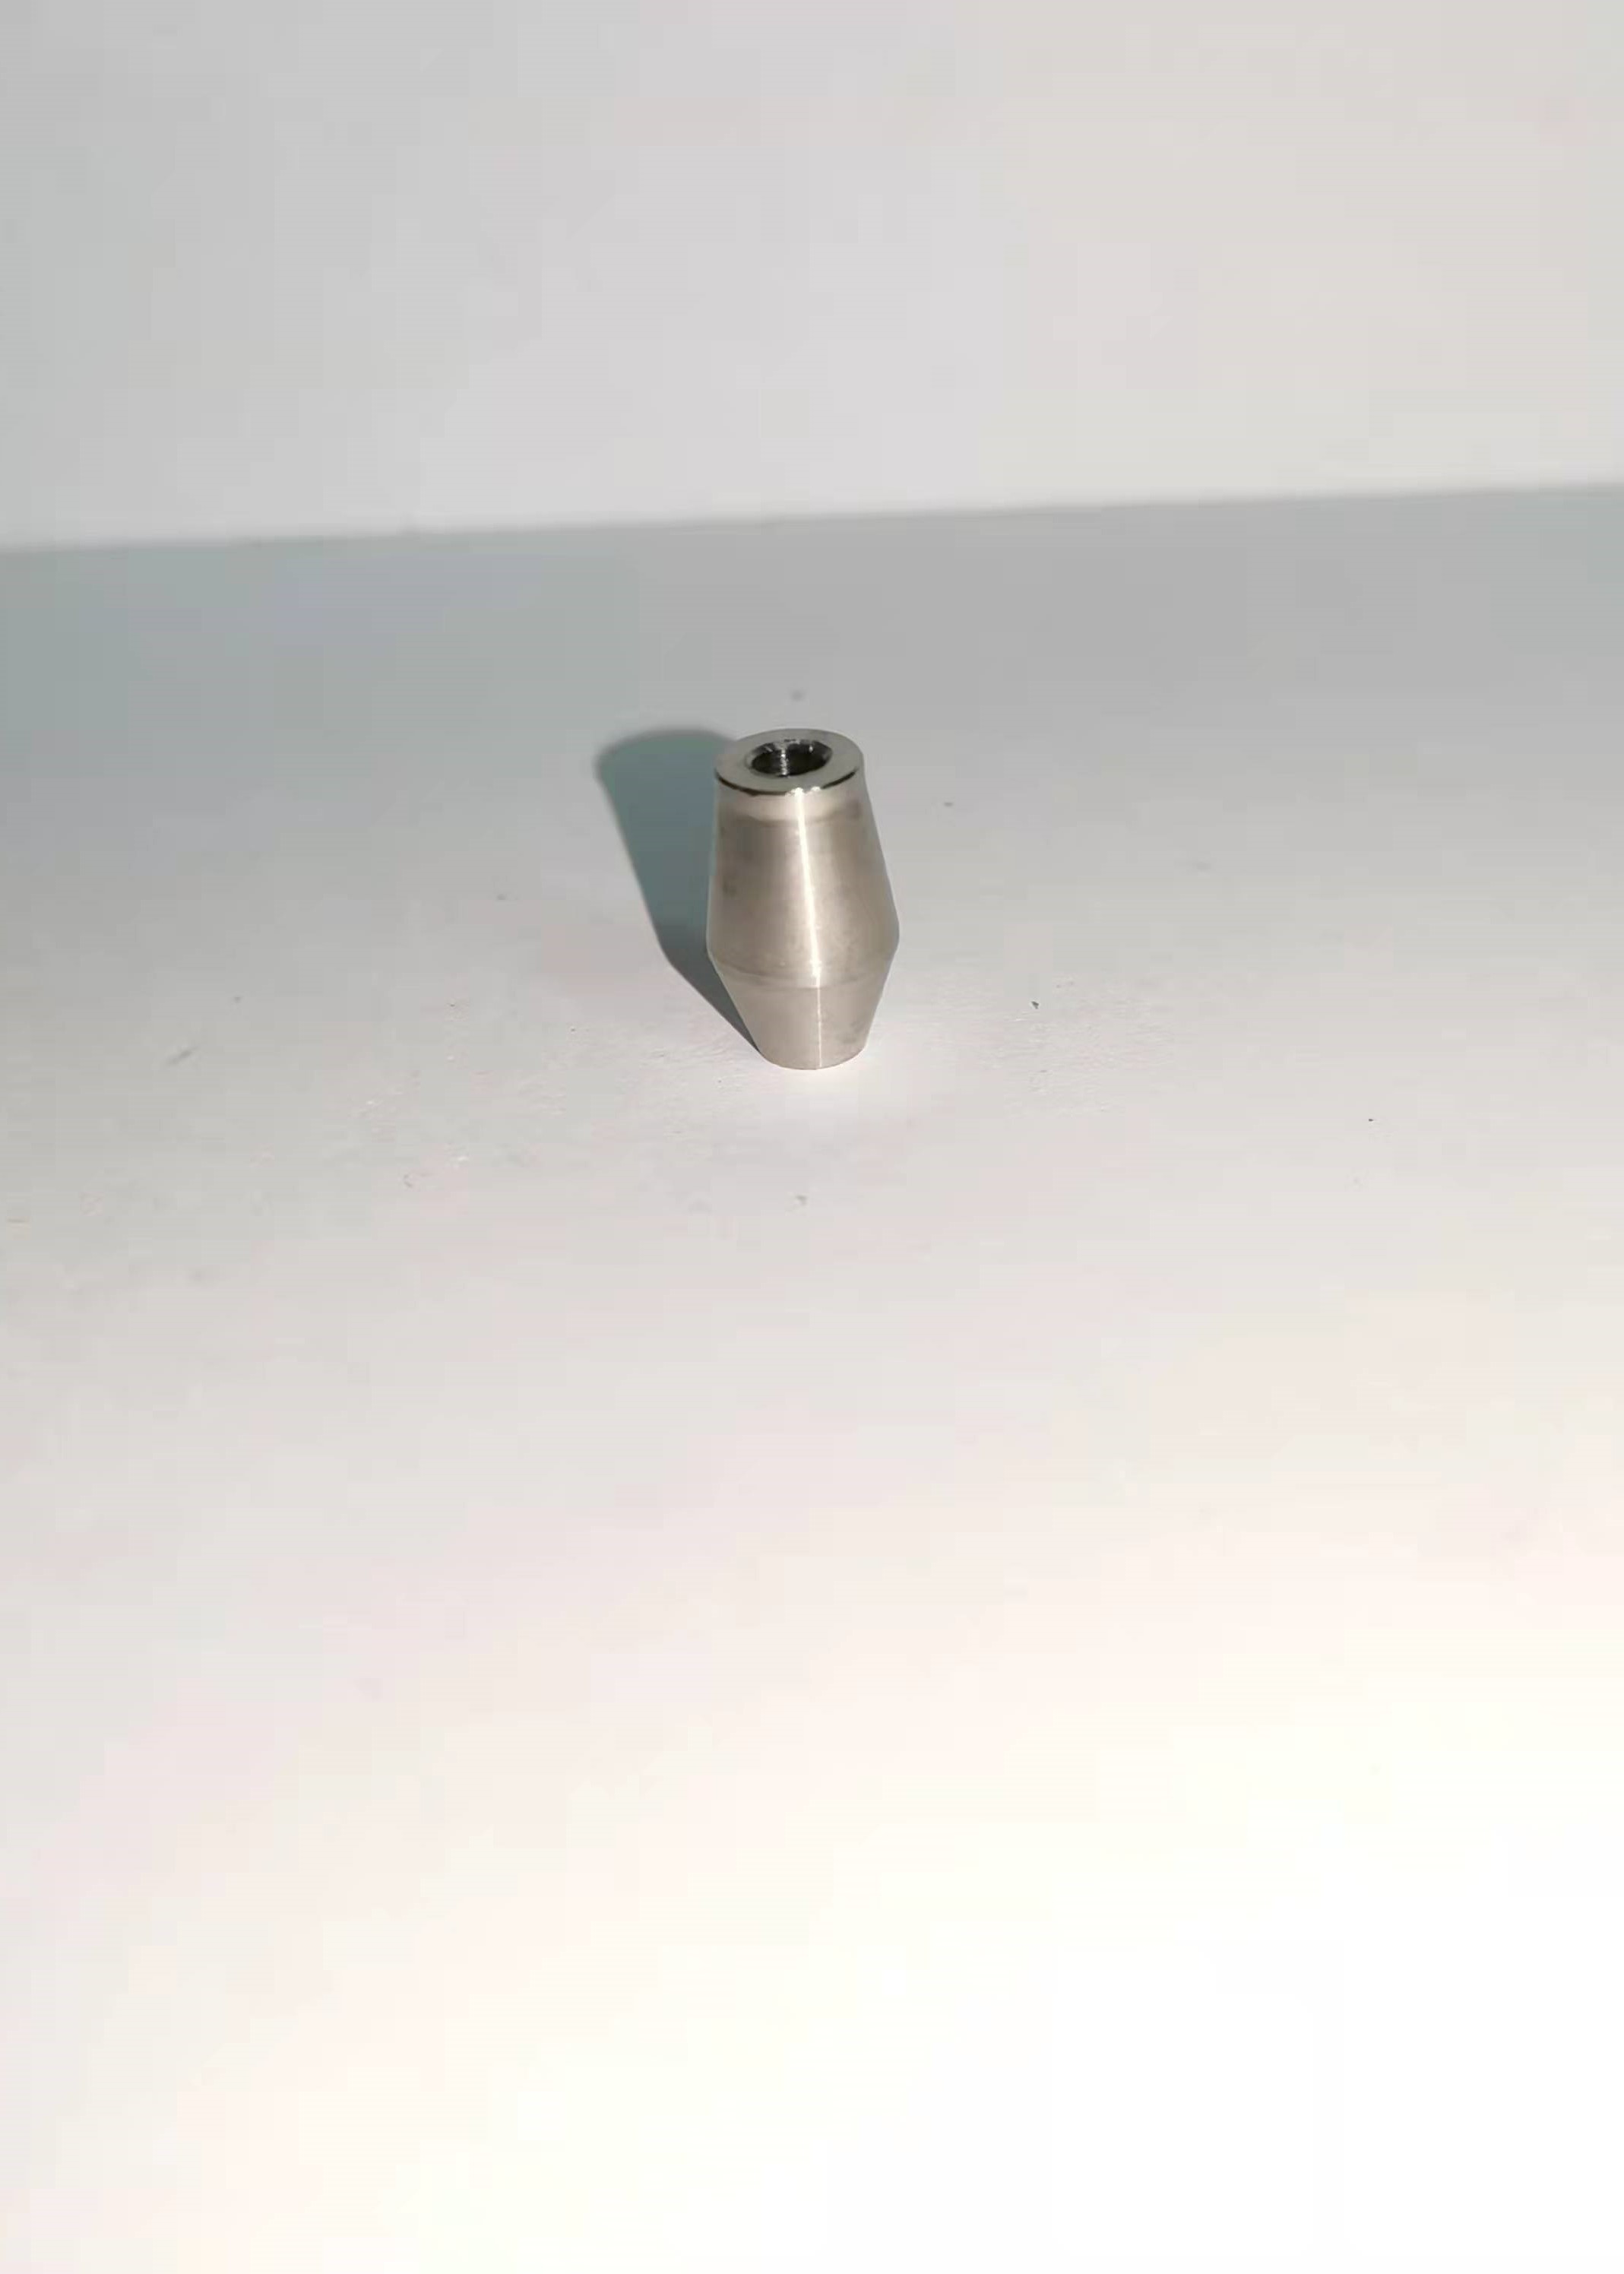 Cheap Dia 4.8mm Stainless Steel Connectors SS 304 Tolerance 0.01mm wholesale